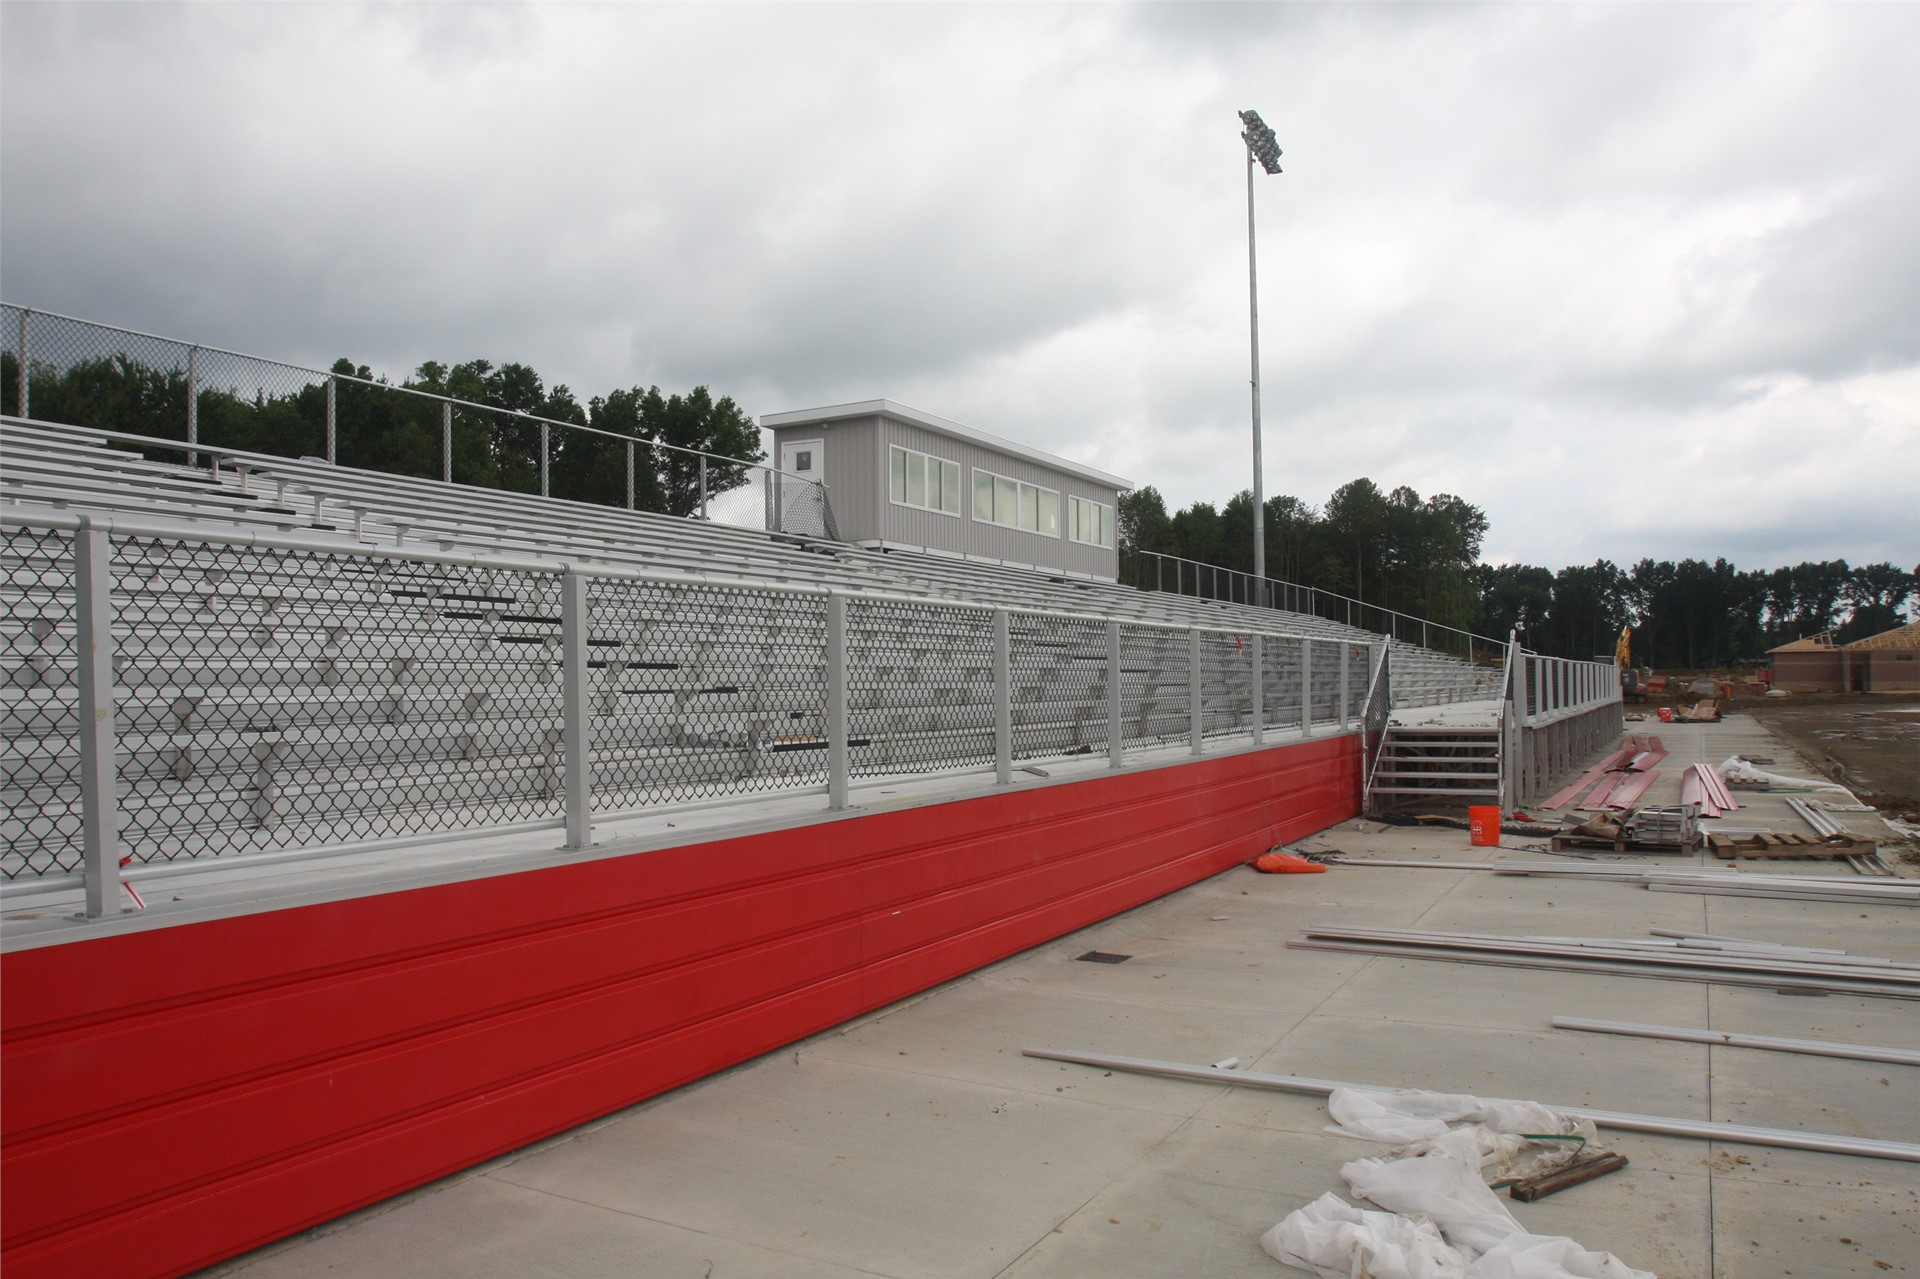 Home stands with red wall covering understructure